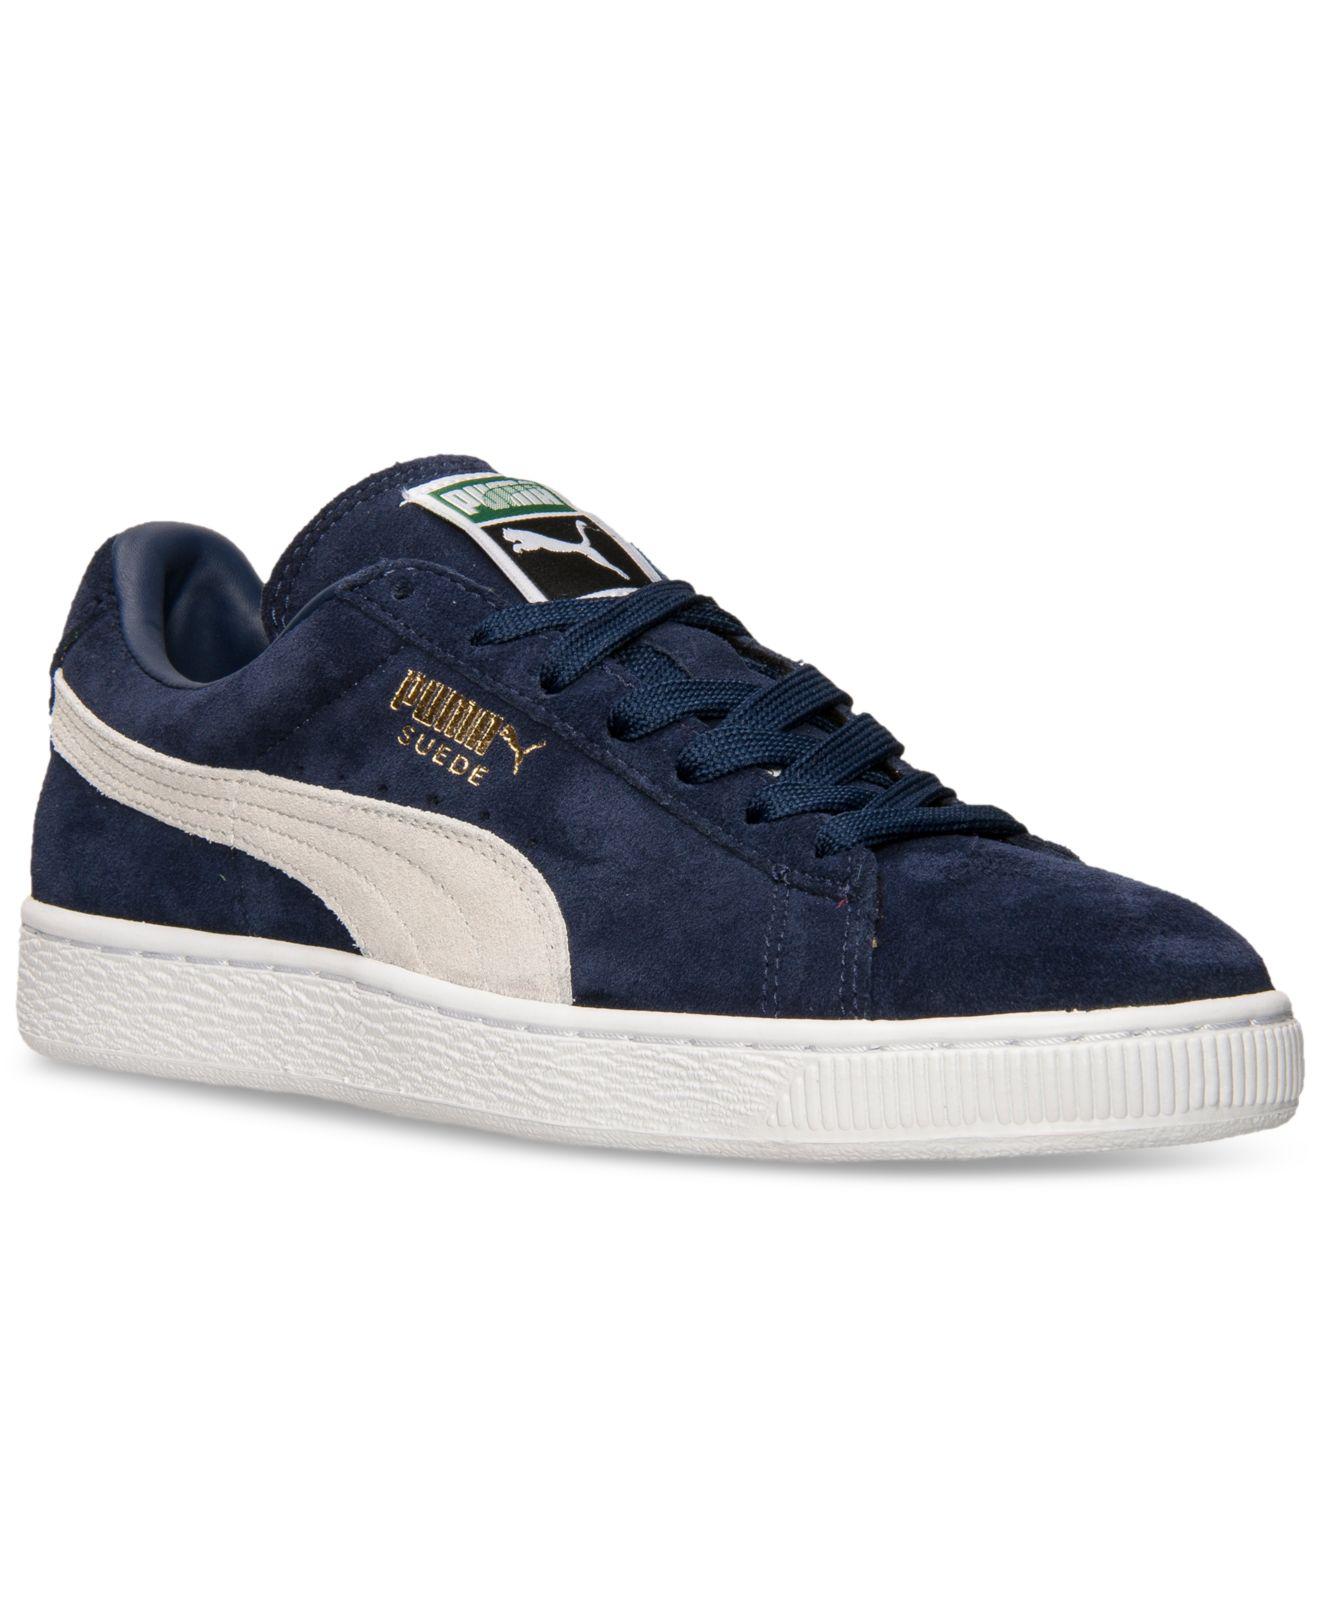 PUMA Suede Classic in Blue for Men - Save 59% - Lyst